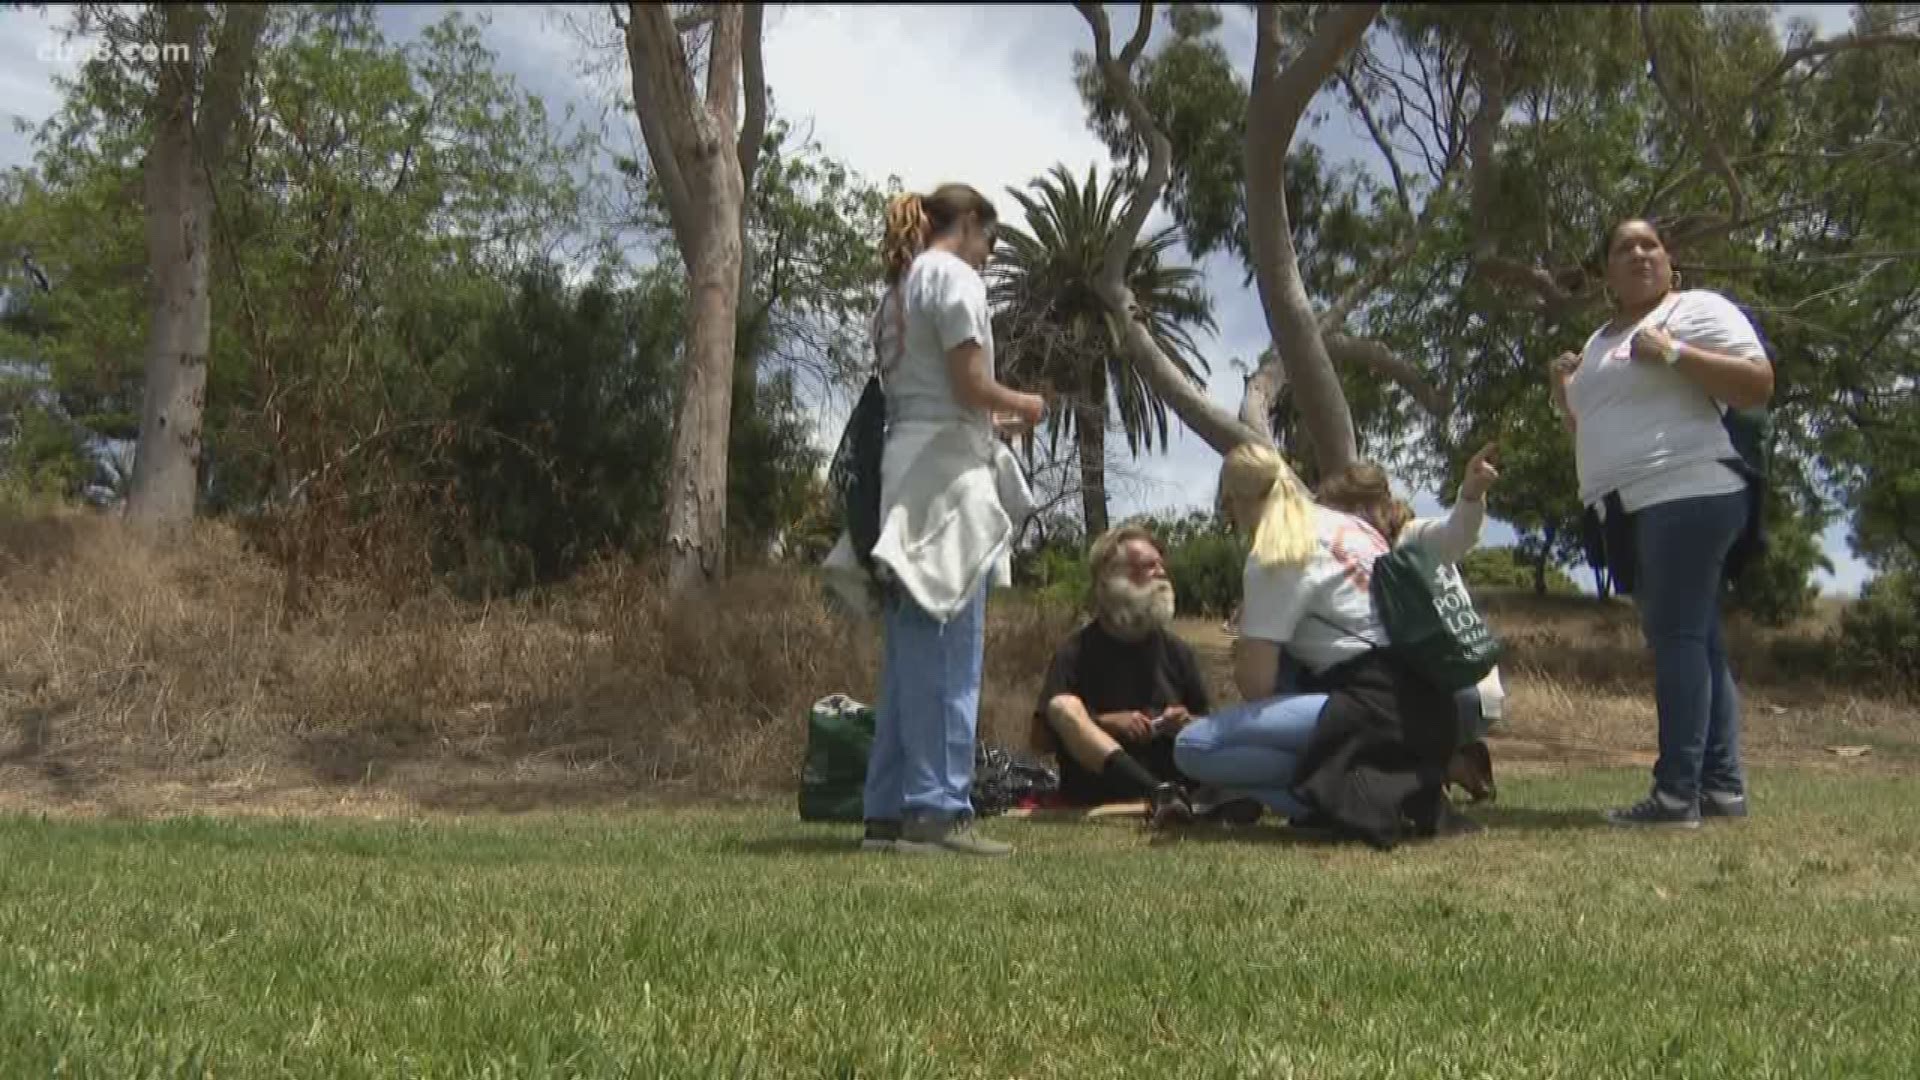 Nearly 30 members from a medical ministry of First Presbyterian Church spent the afternoon giving free medical evaluations to the homeless in Balboa Park and other surrounding neighborhoods.